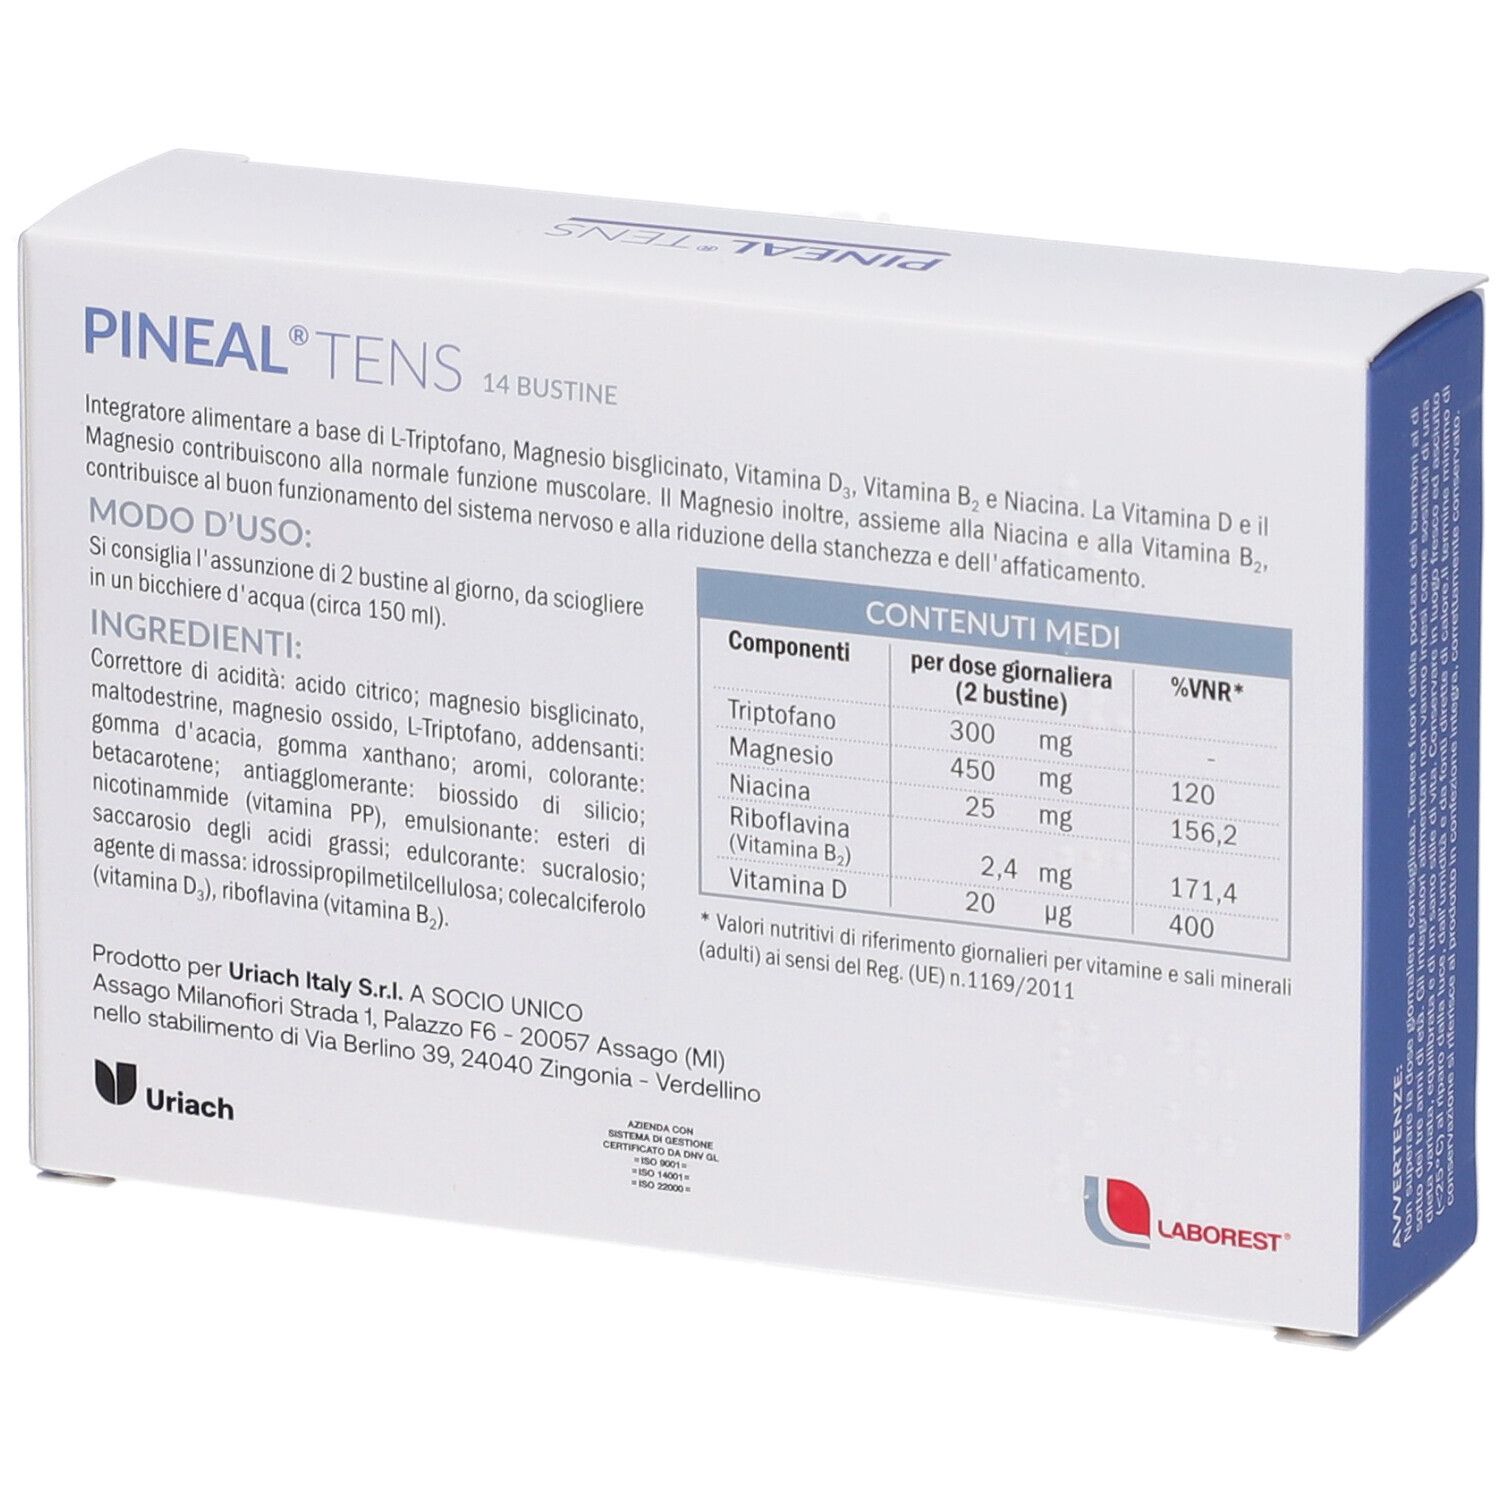 Laborest® Pineal® Tens Bustine